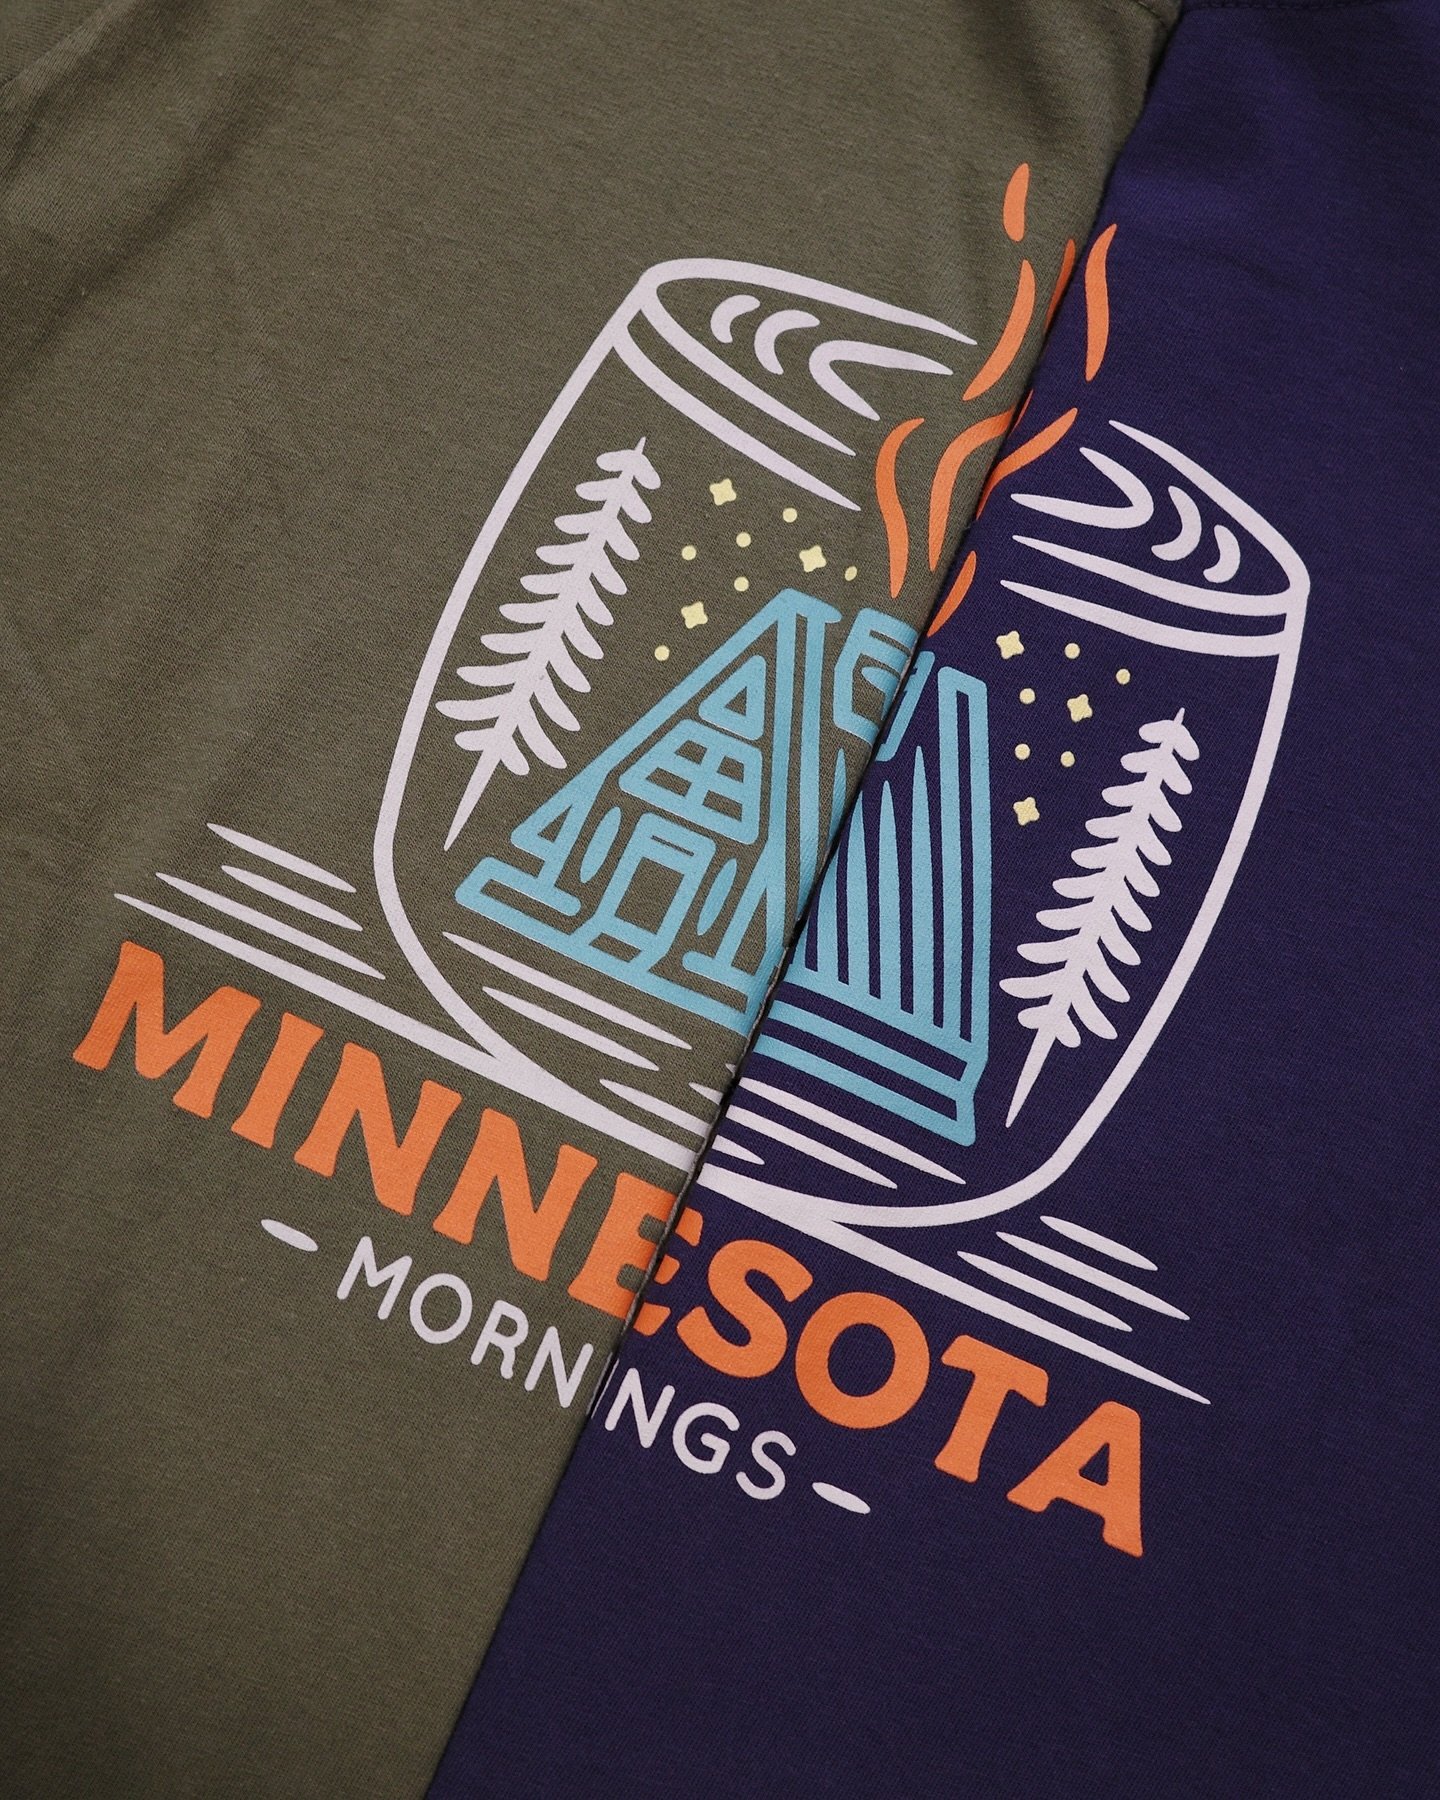 🌅 MINNESOTA MORNINGS ☕️
&bull;
LOW STOCK alert of the Olive and Navy colorways of our MN Mornings tees&hellip; These colors won&rsquo;t be restocked -&gt; Don&rsquo;t say we didn&rsquo;t warn you! 🏃🏻&zwj;➡️ Available both in-store and online while